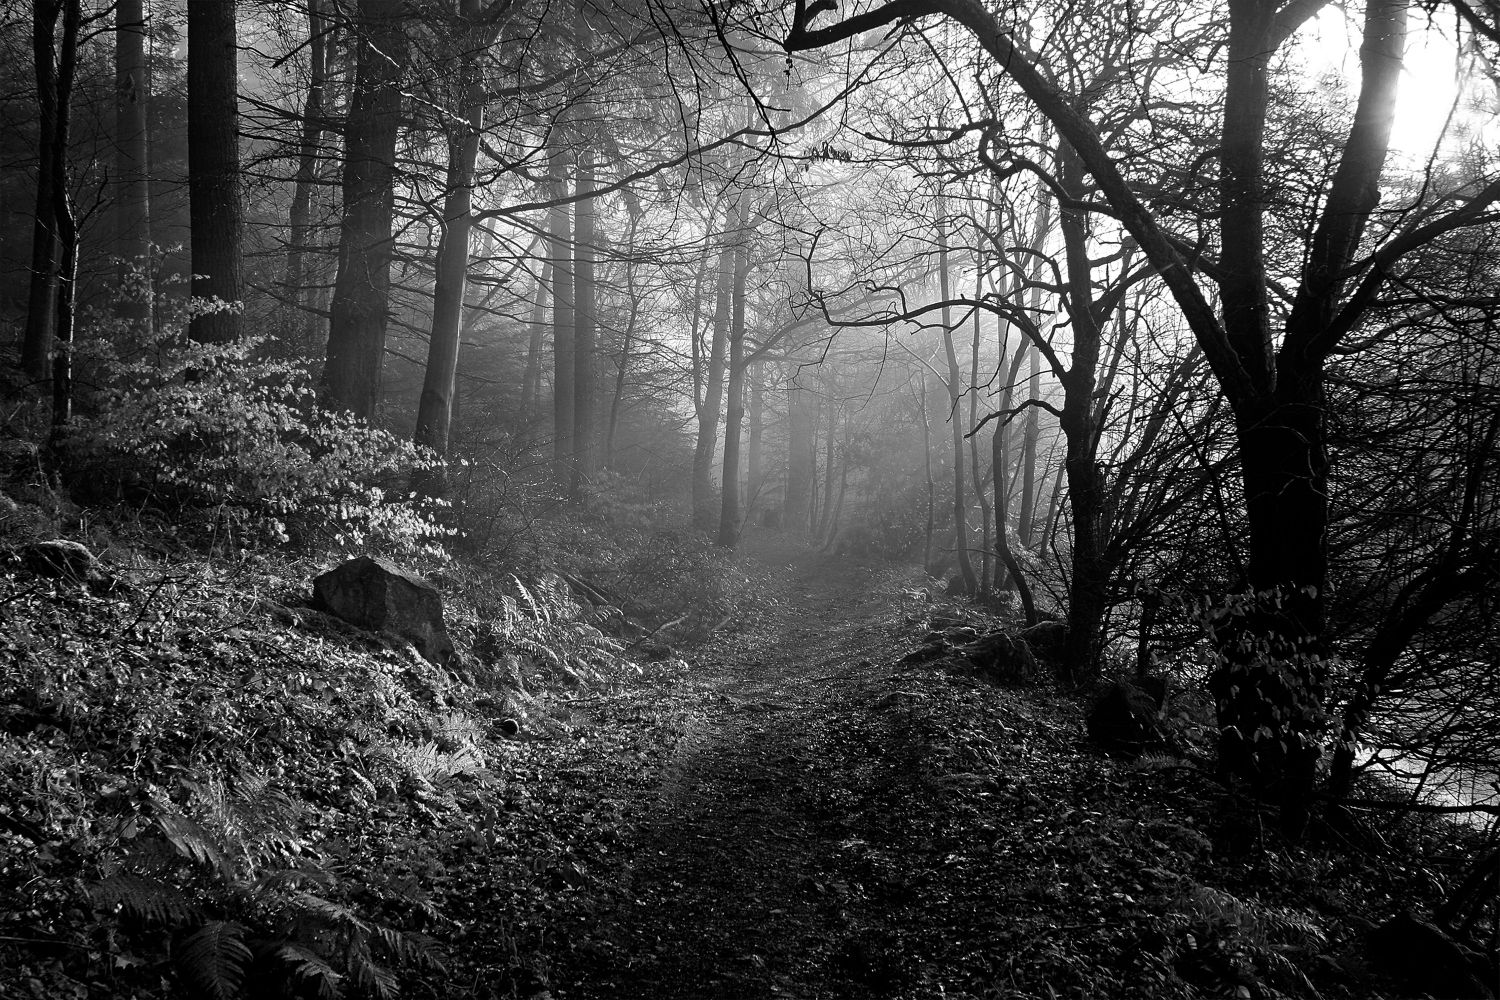 Footpath through Dodd Wood Bassenthwaite in Black and White by Martin Lawrence